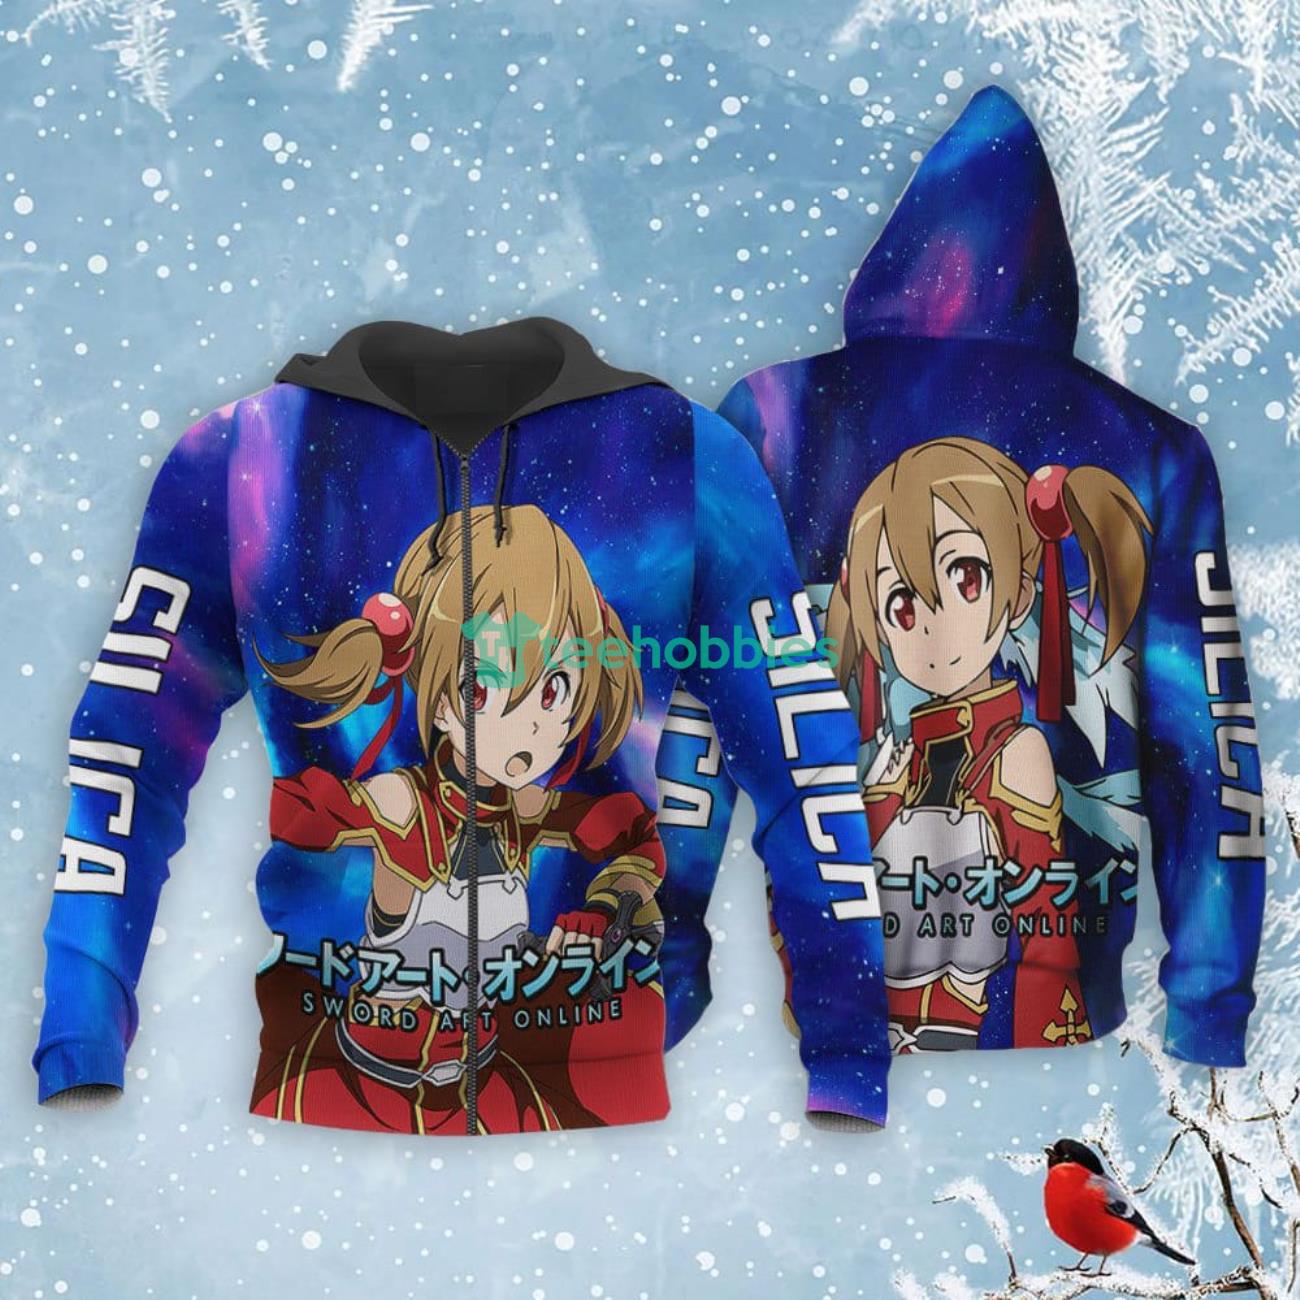 Silica All Over Printed 3D Shirt Sword Art Online Custom Anime Fans Product Photo 1 Product photo 1